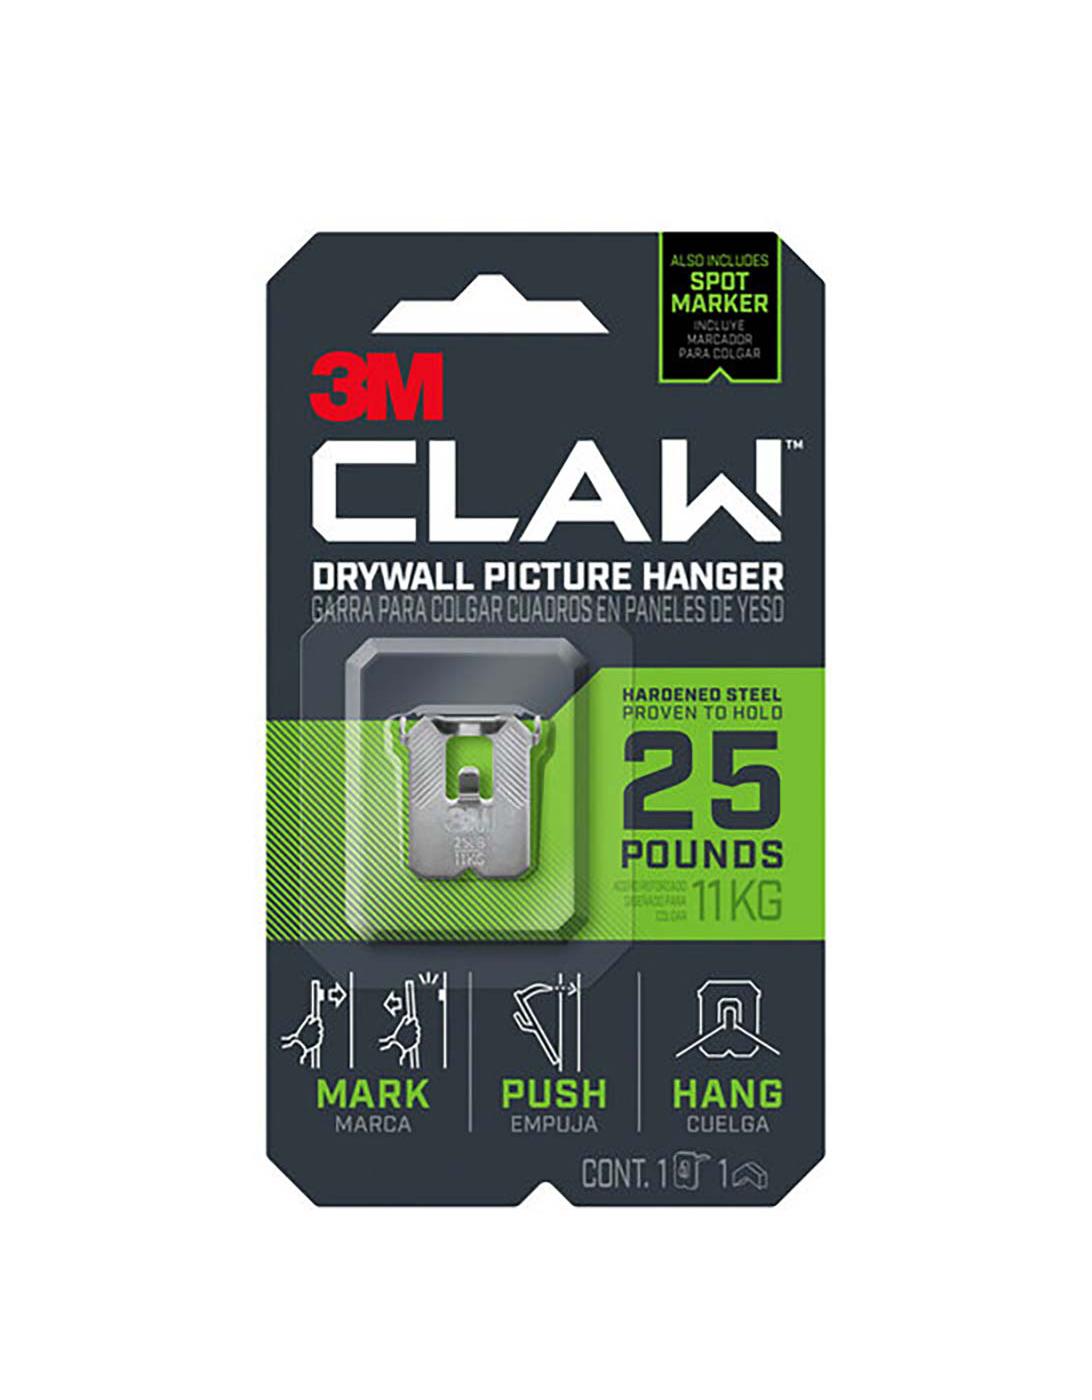 3M Claw 25LB Drywall Picture Hanger; image 1 of 3